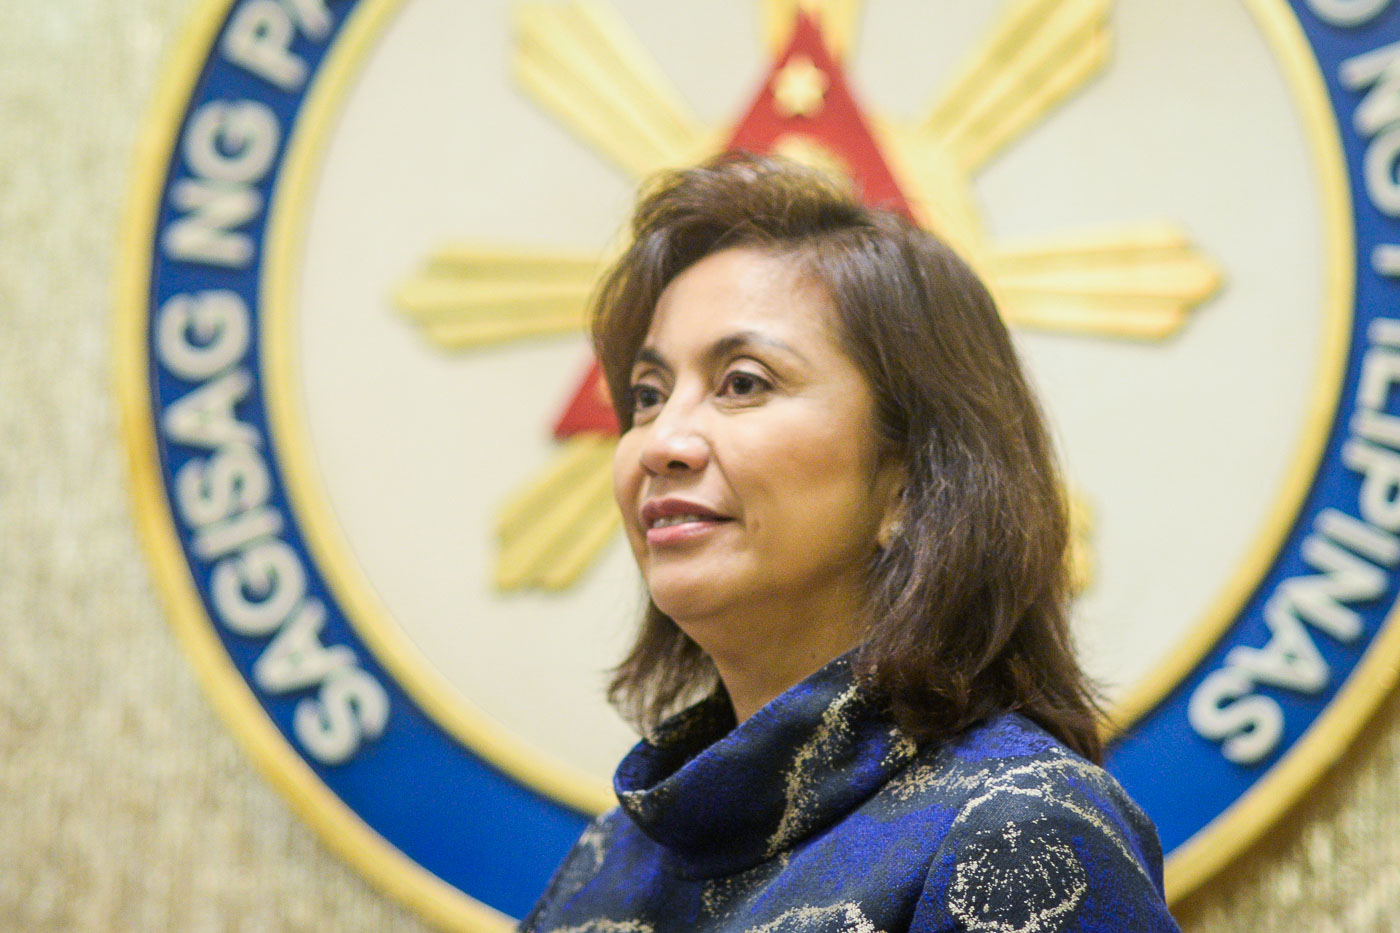 BIKOY COMPLAINT. Vice President Leni Robredo says the inciting to sedition complaint against her over the Bikoy videos is another tactic to remove her from office. File photo by the Office of the Vice President 